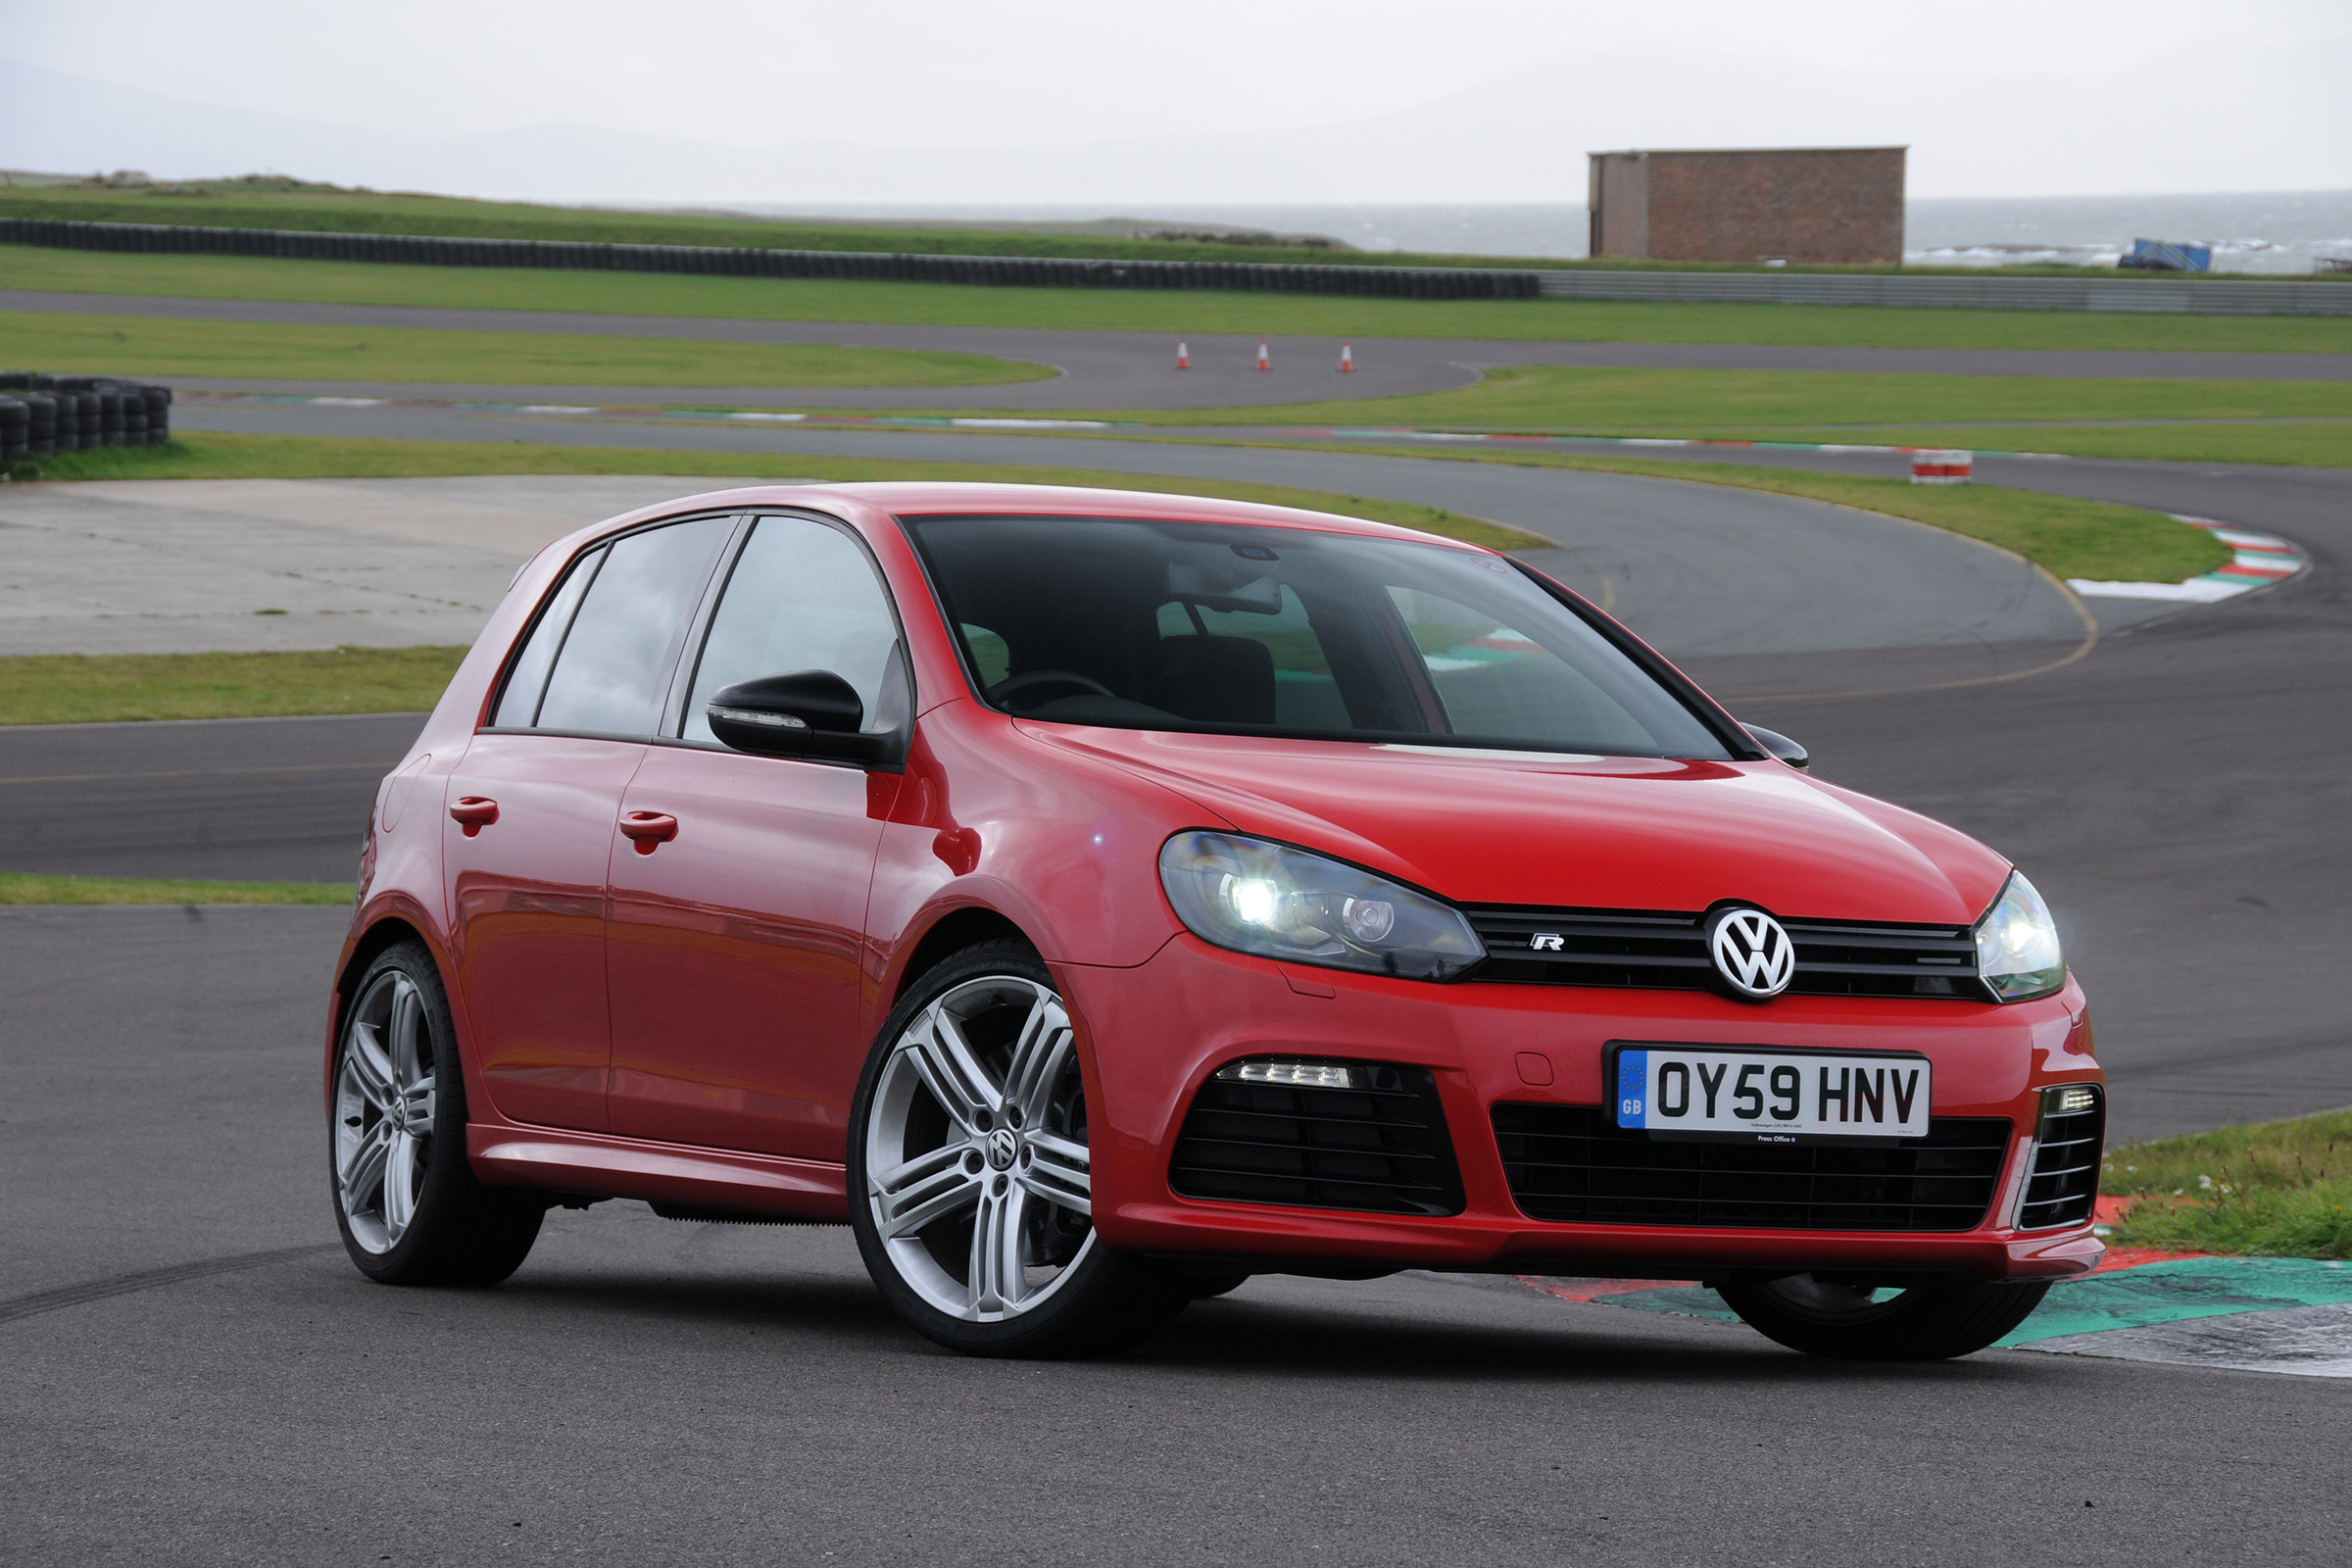 Volkswagen Golf R Mk6 10 12 Review History And Used Buying Guide Evo